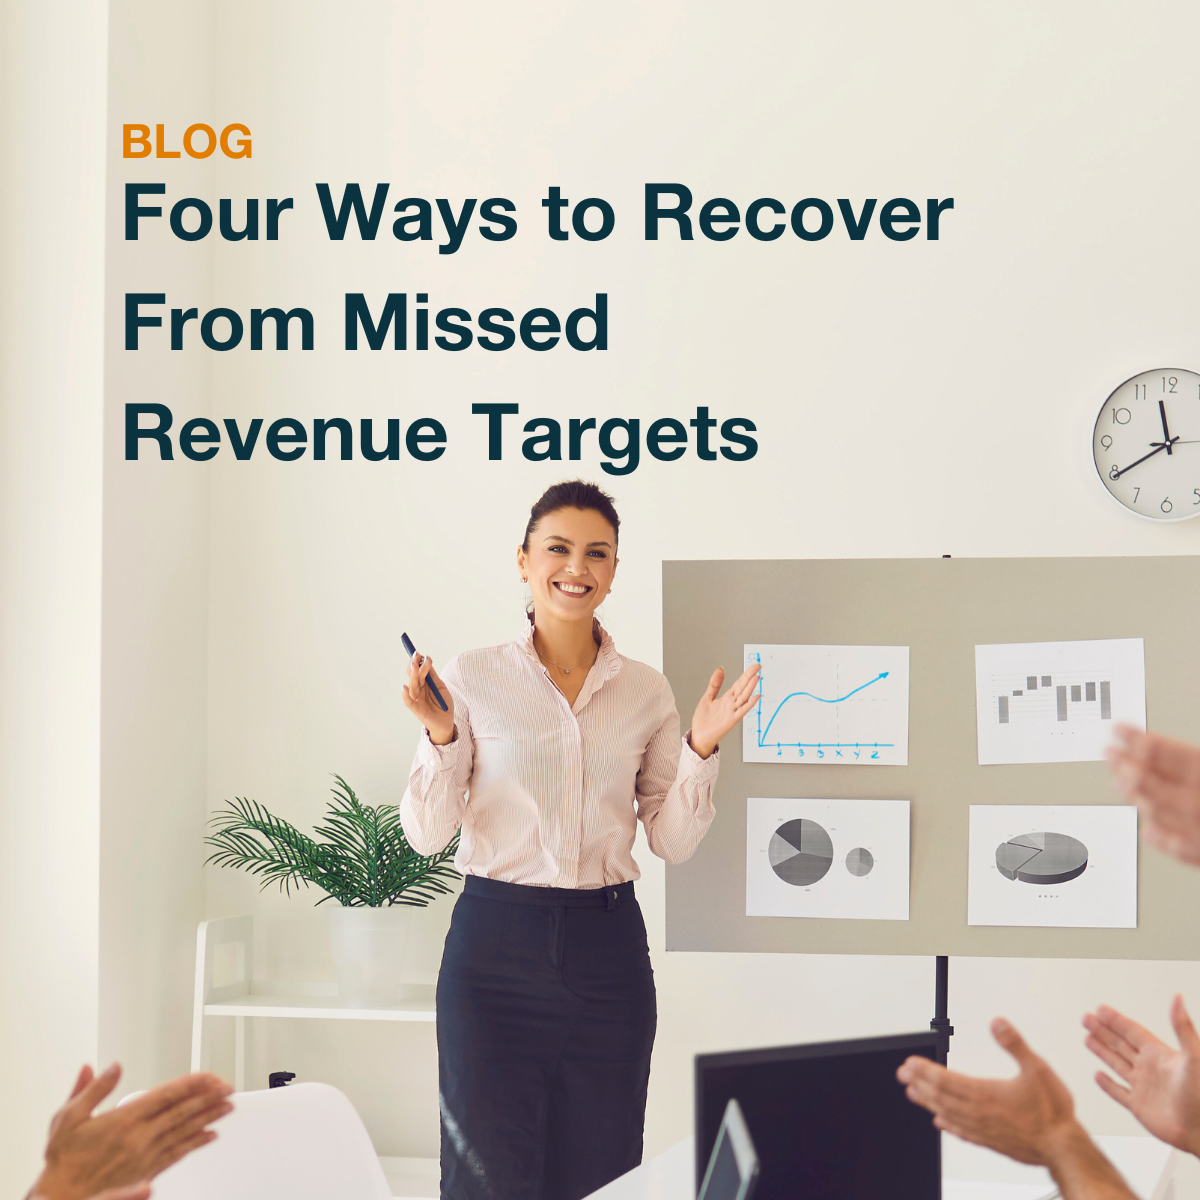 Four Ways to Recover From Missed Revenue Targets